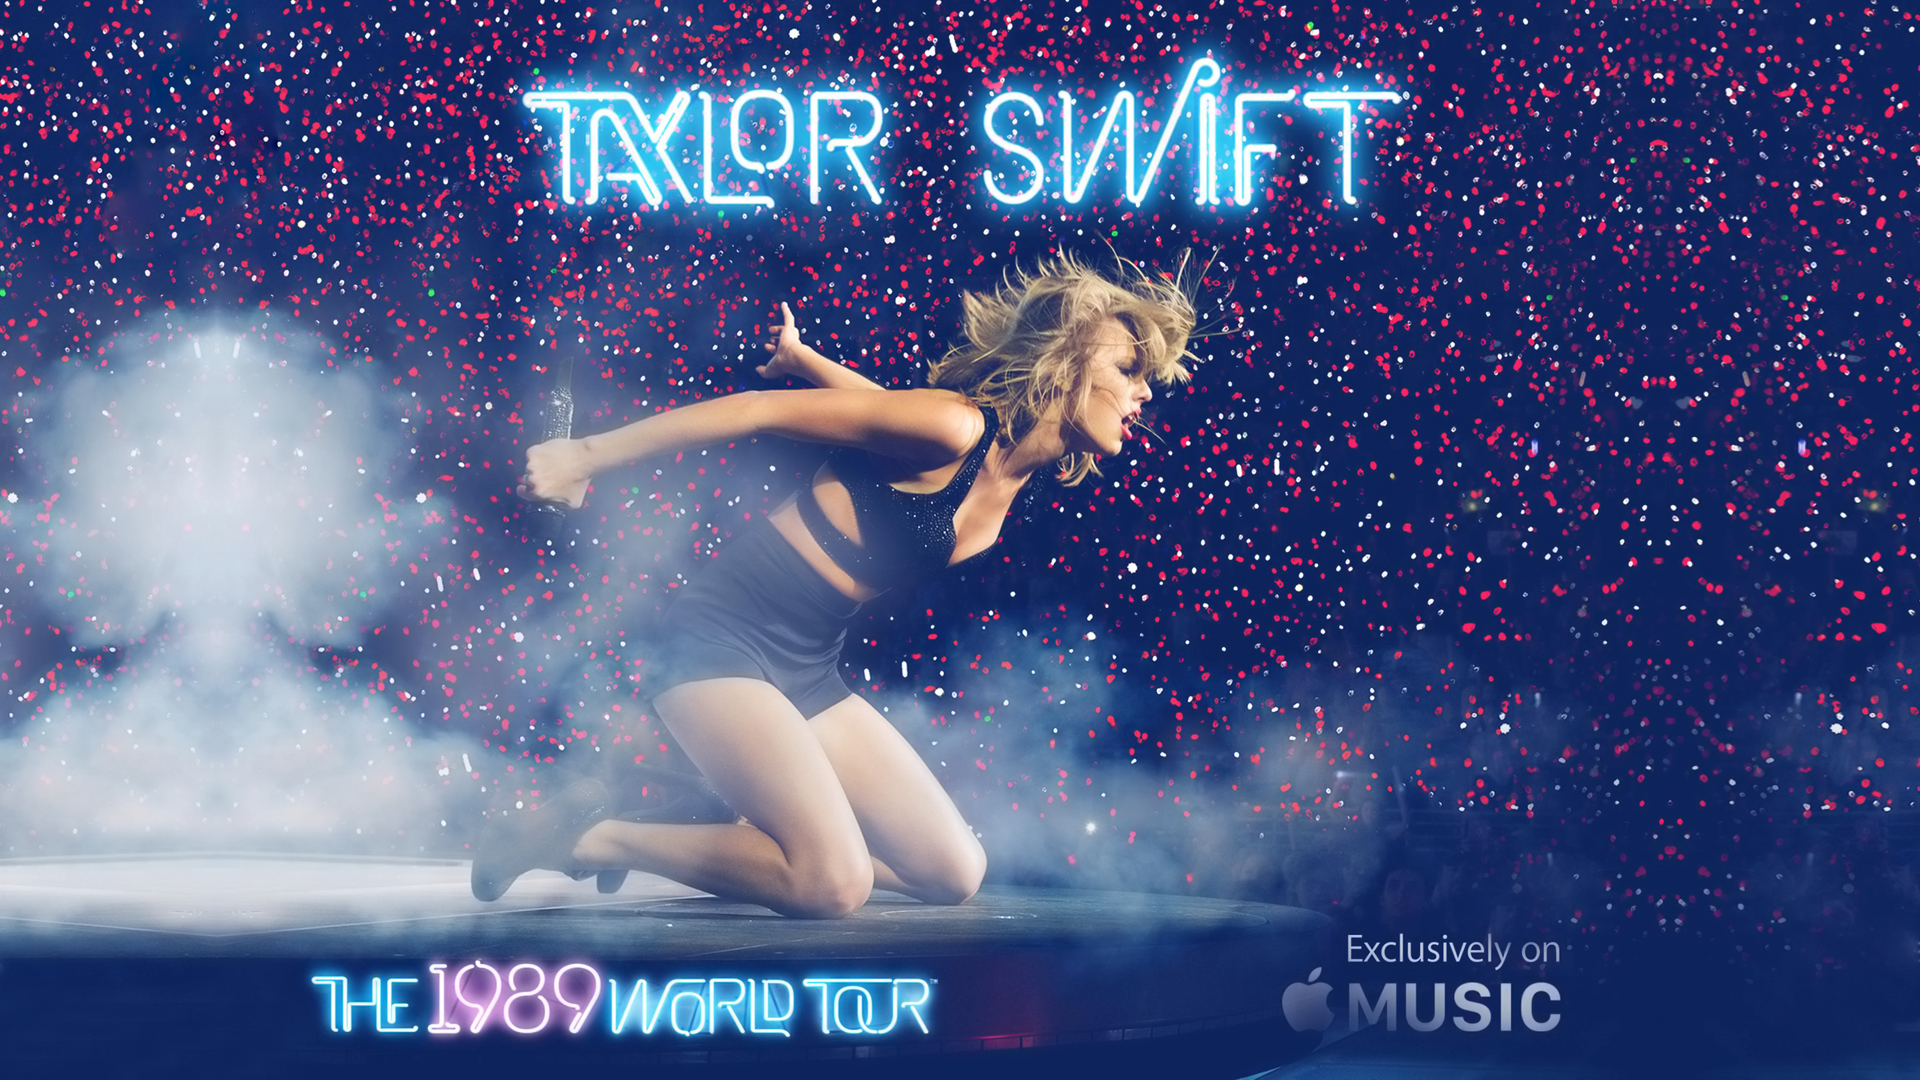 Taylor Swift World Tour Wallpaper01 By Funkycop999 On